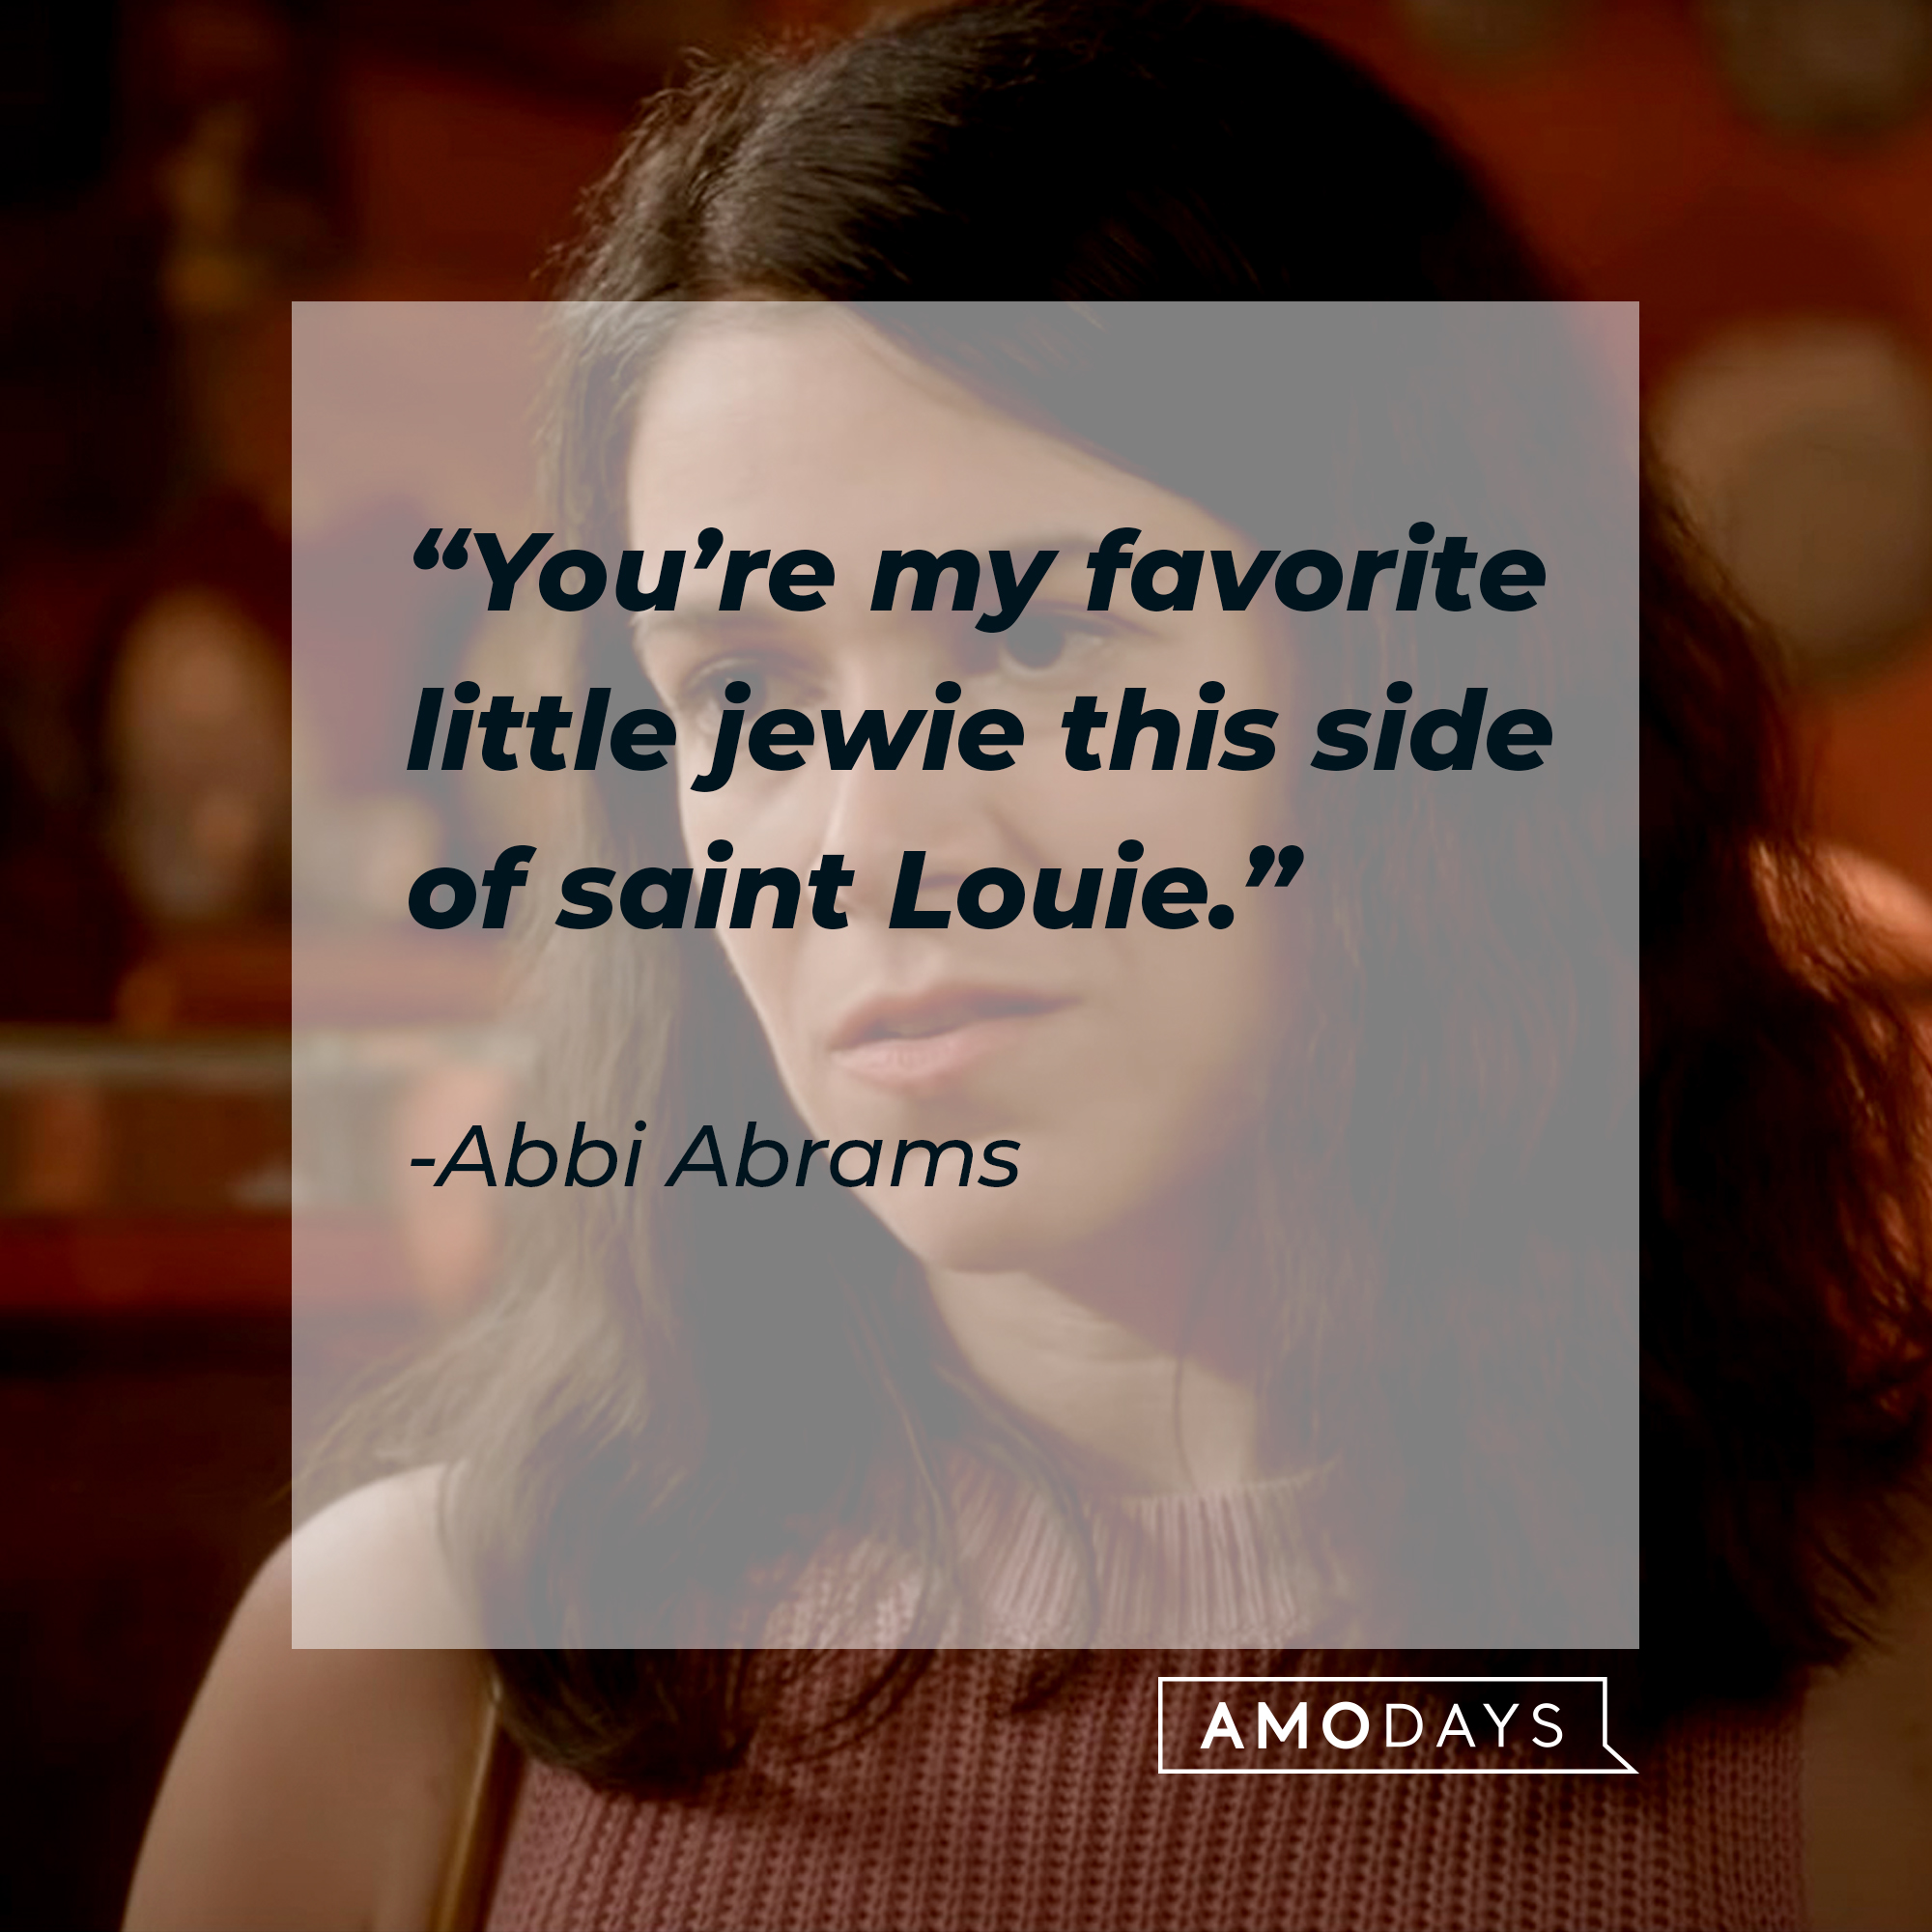 An image of Abbi Abrams with her quote: “You’re my favorite little jewie this side of saint Louie.” | Source: youtube.com/ComedyCentral